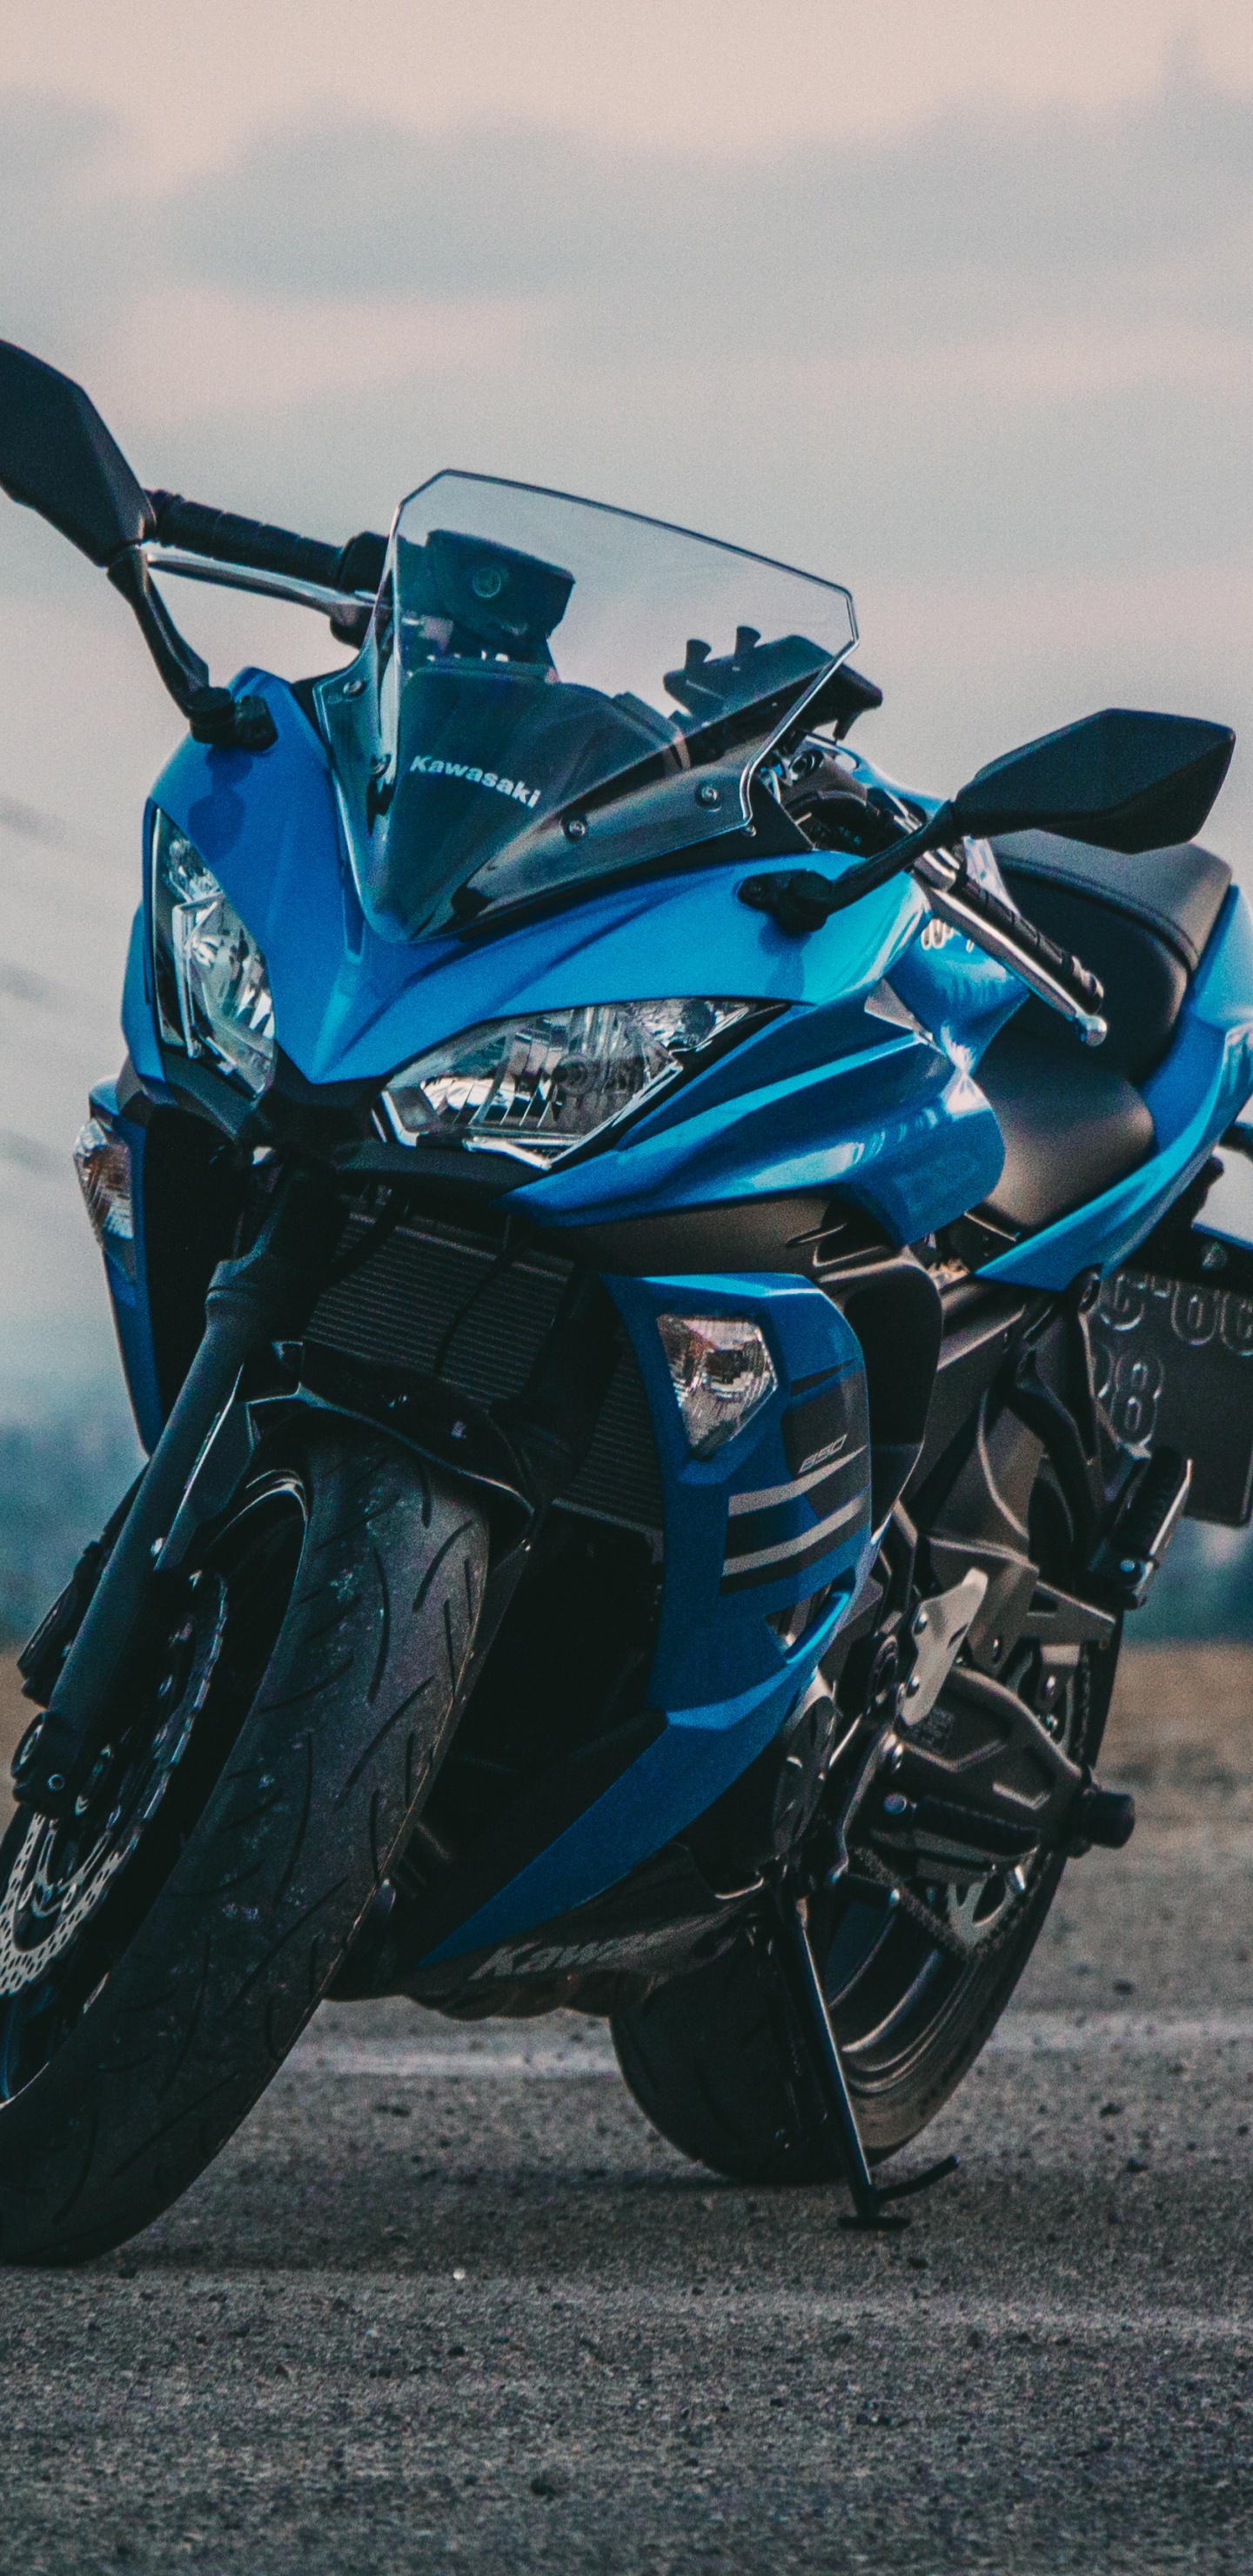 Blue and Black Sports Bike on Gray Asphalt Road During Daytime. Wallpaper in 1440x2960 Resolution